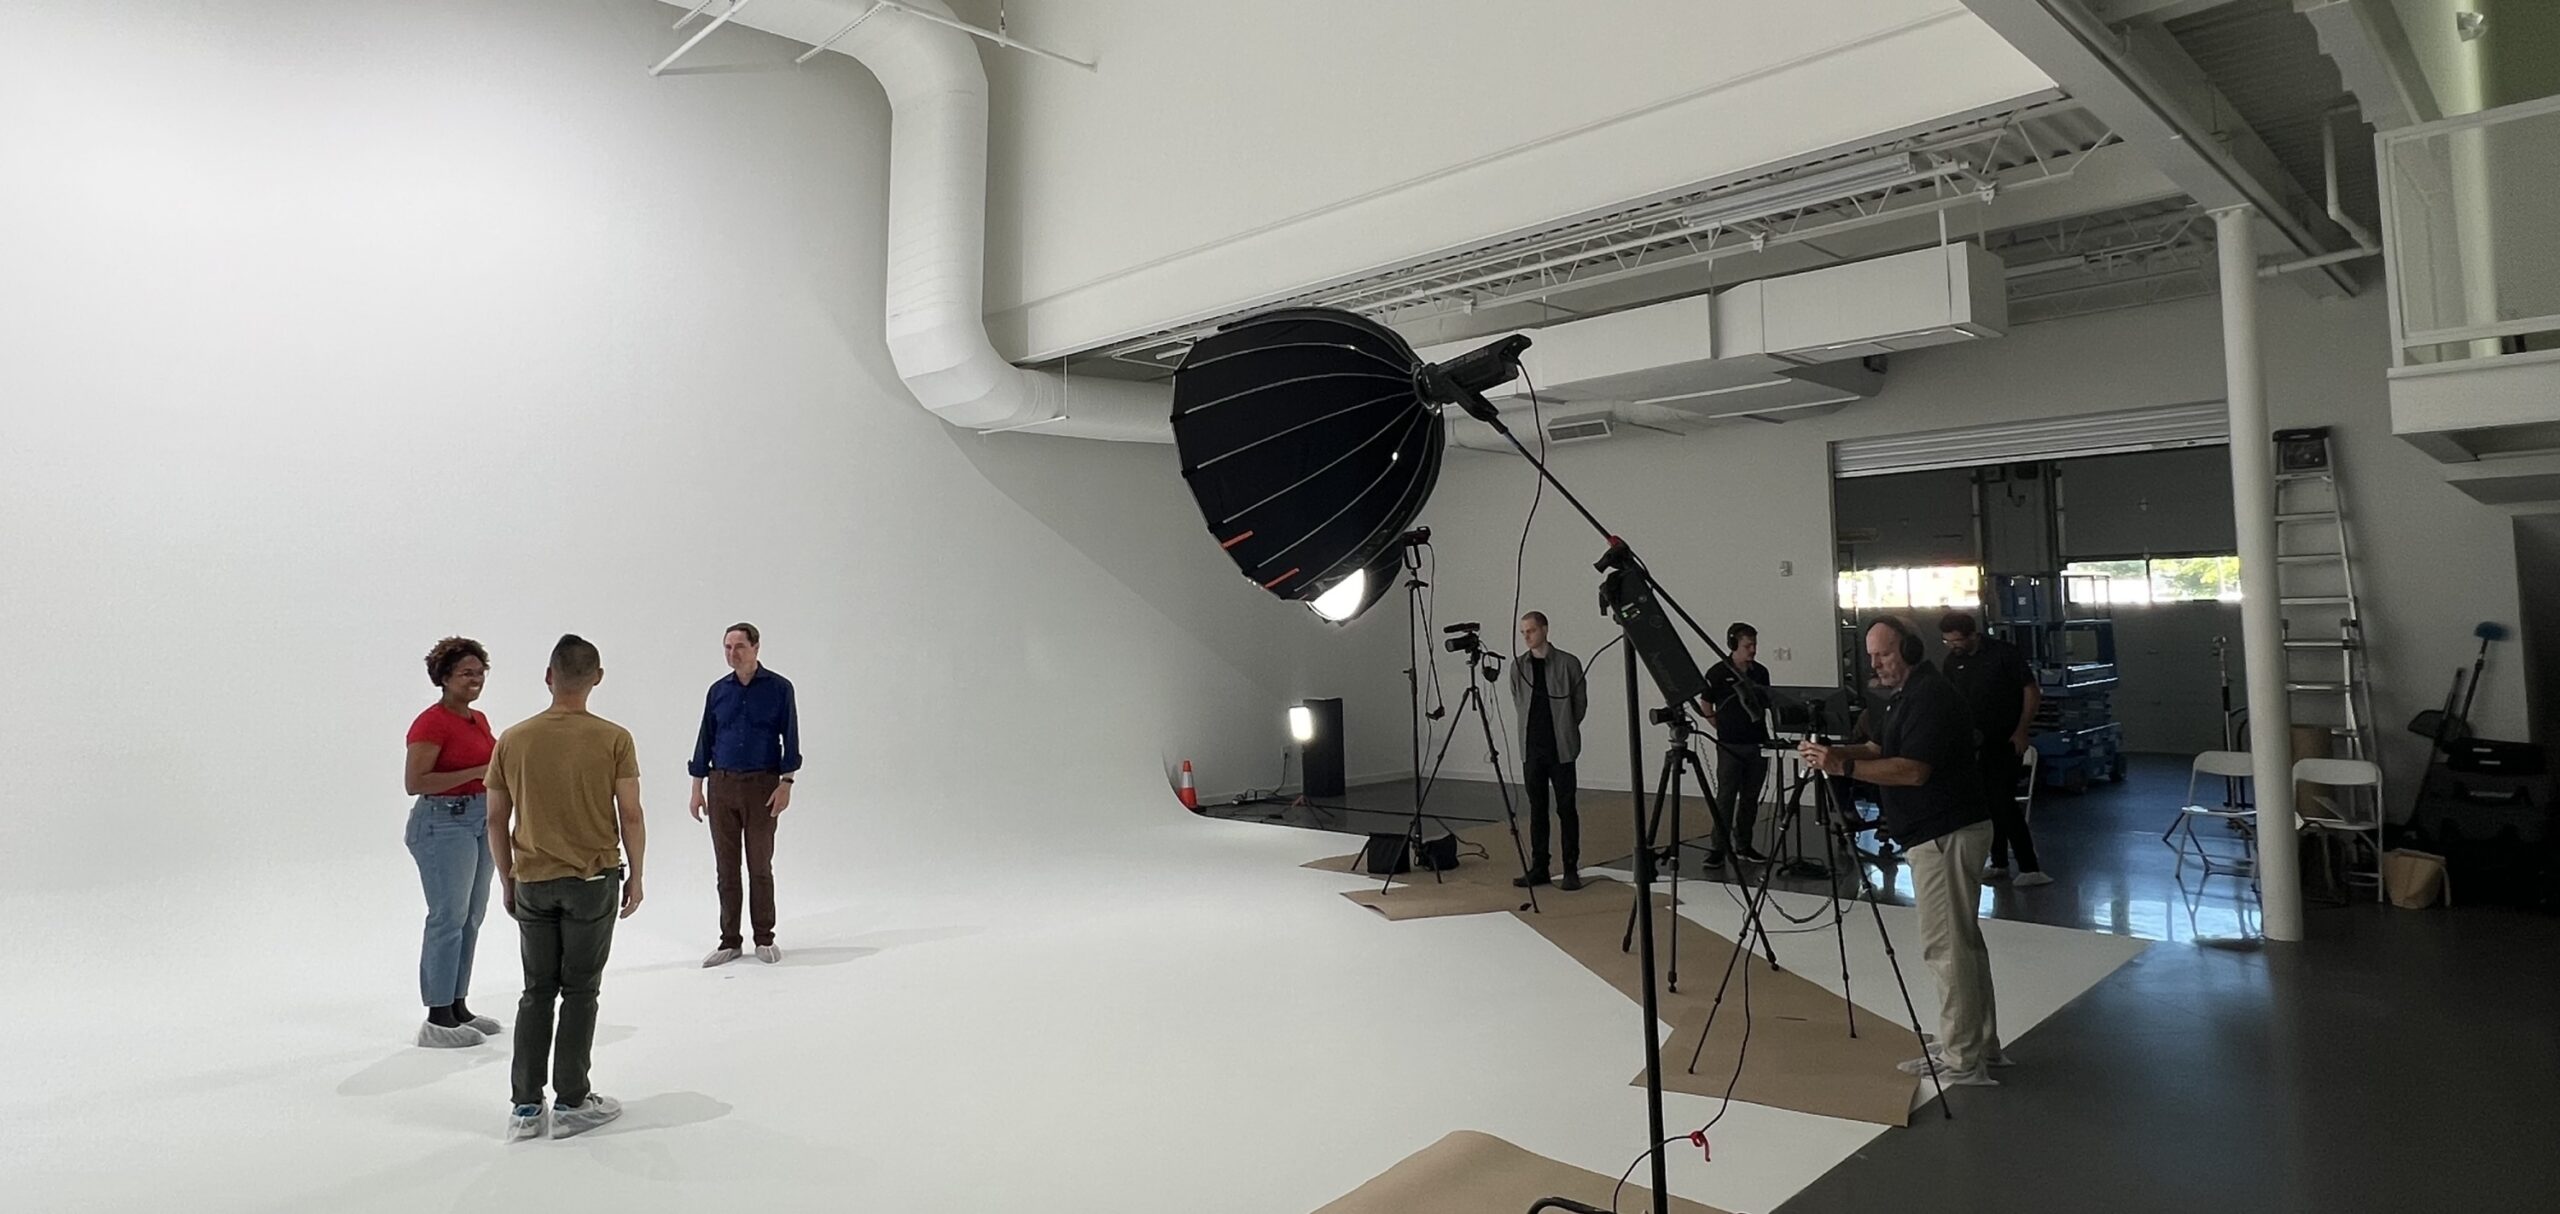 People are in a spacious studio with white walls and floor, involved in a photoshoot or video production. Some individuals are operating cameras and equipment, while two people stand under a large lighting umbrella. Various gear and backdrops are visible around.